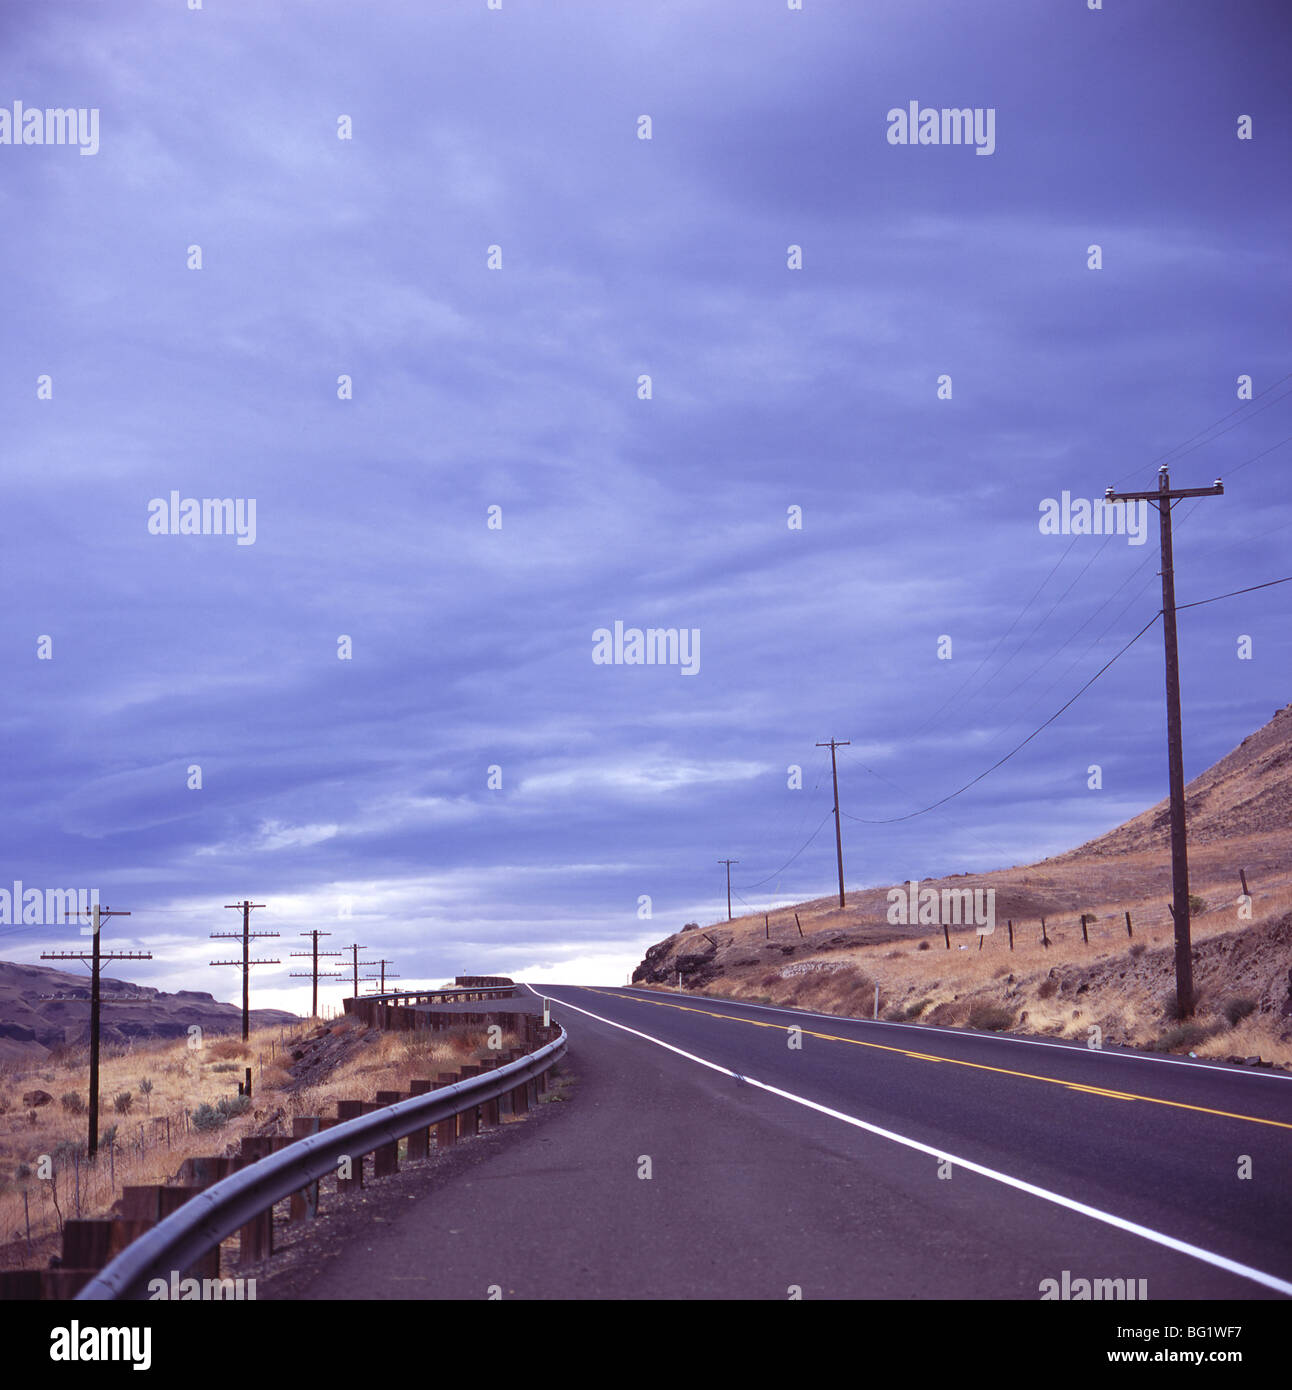 Empty road with power poles on both sides, Eastern Washington State, United States of America, North America Stock Photo